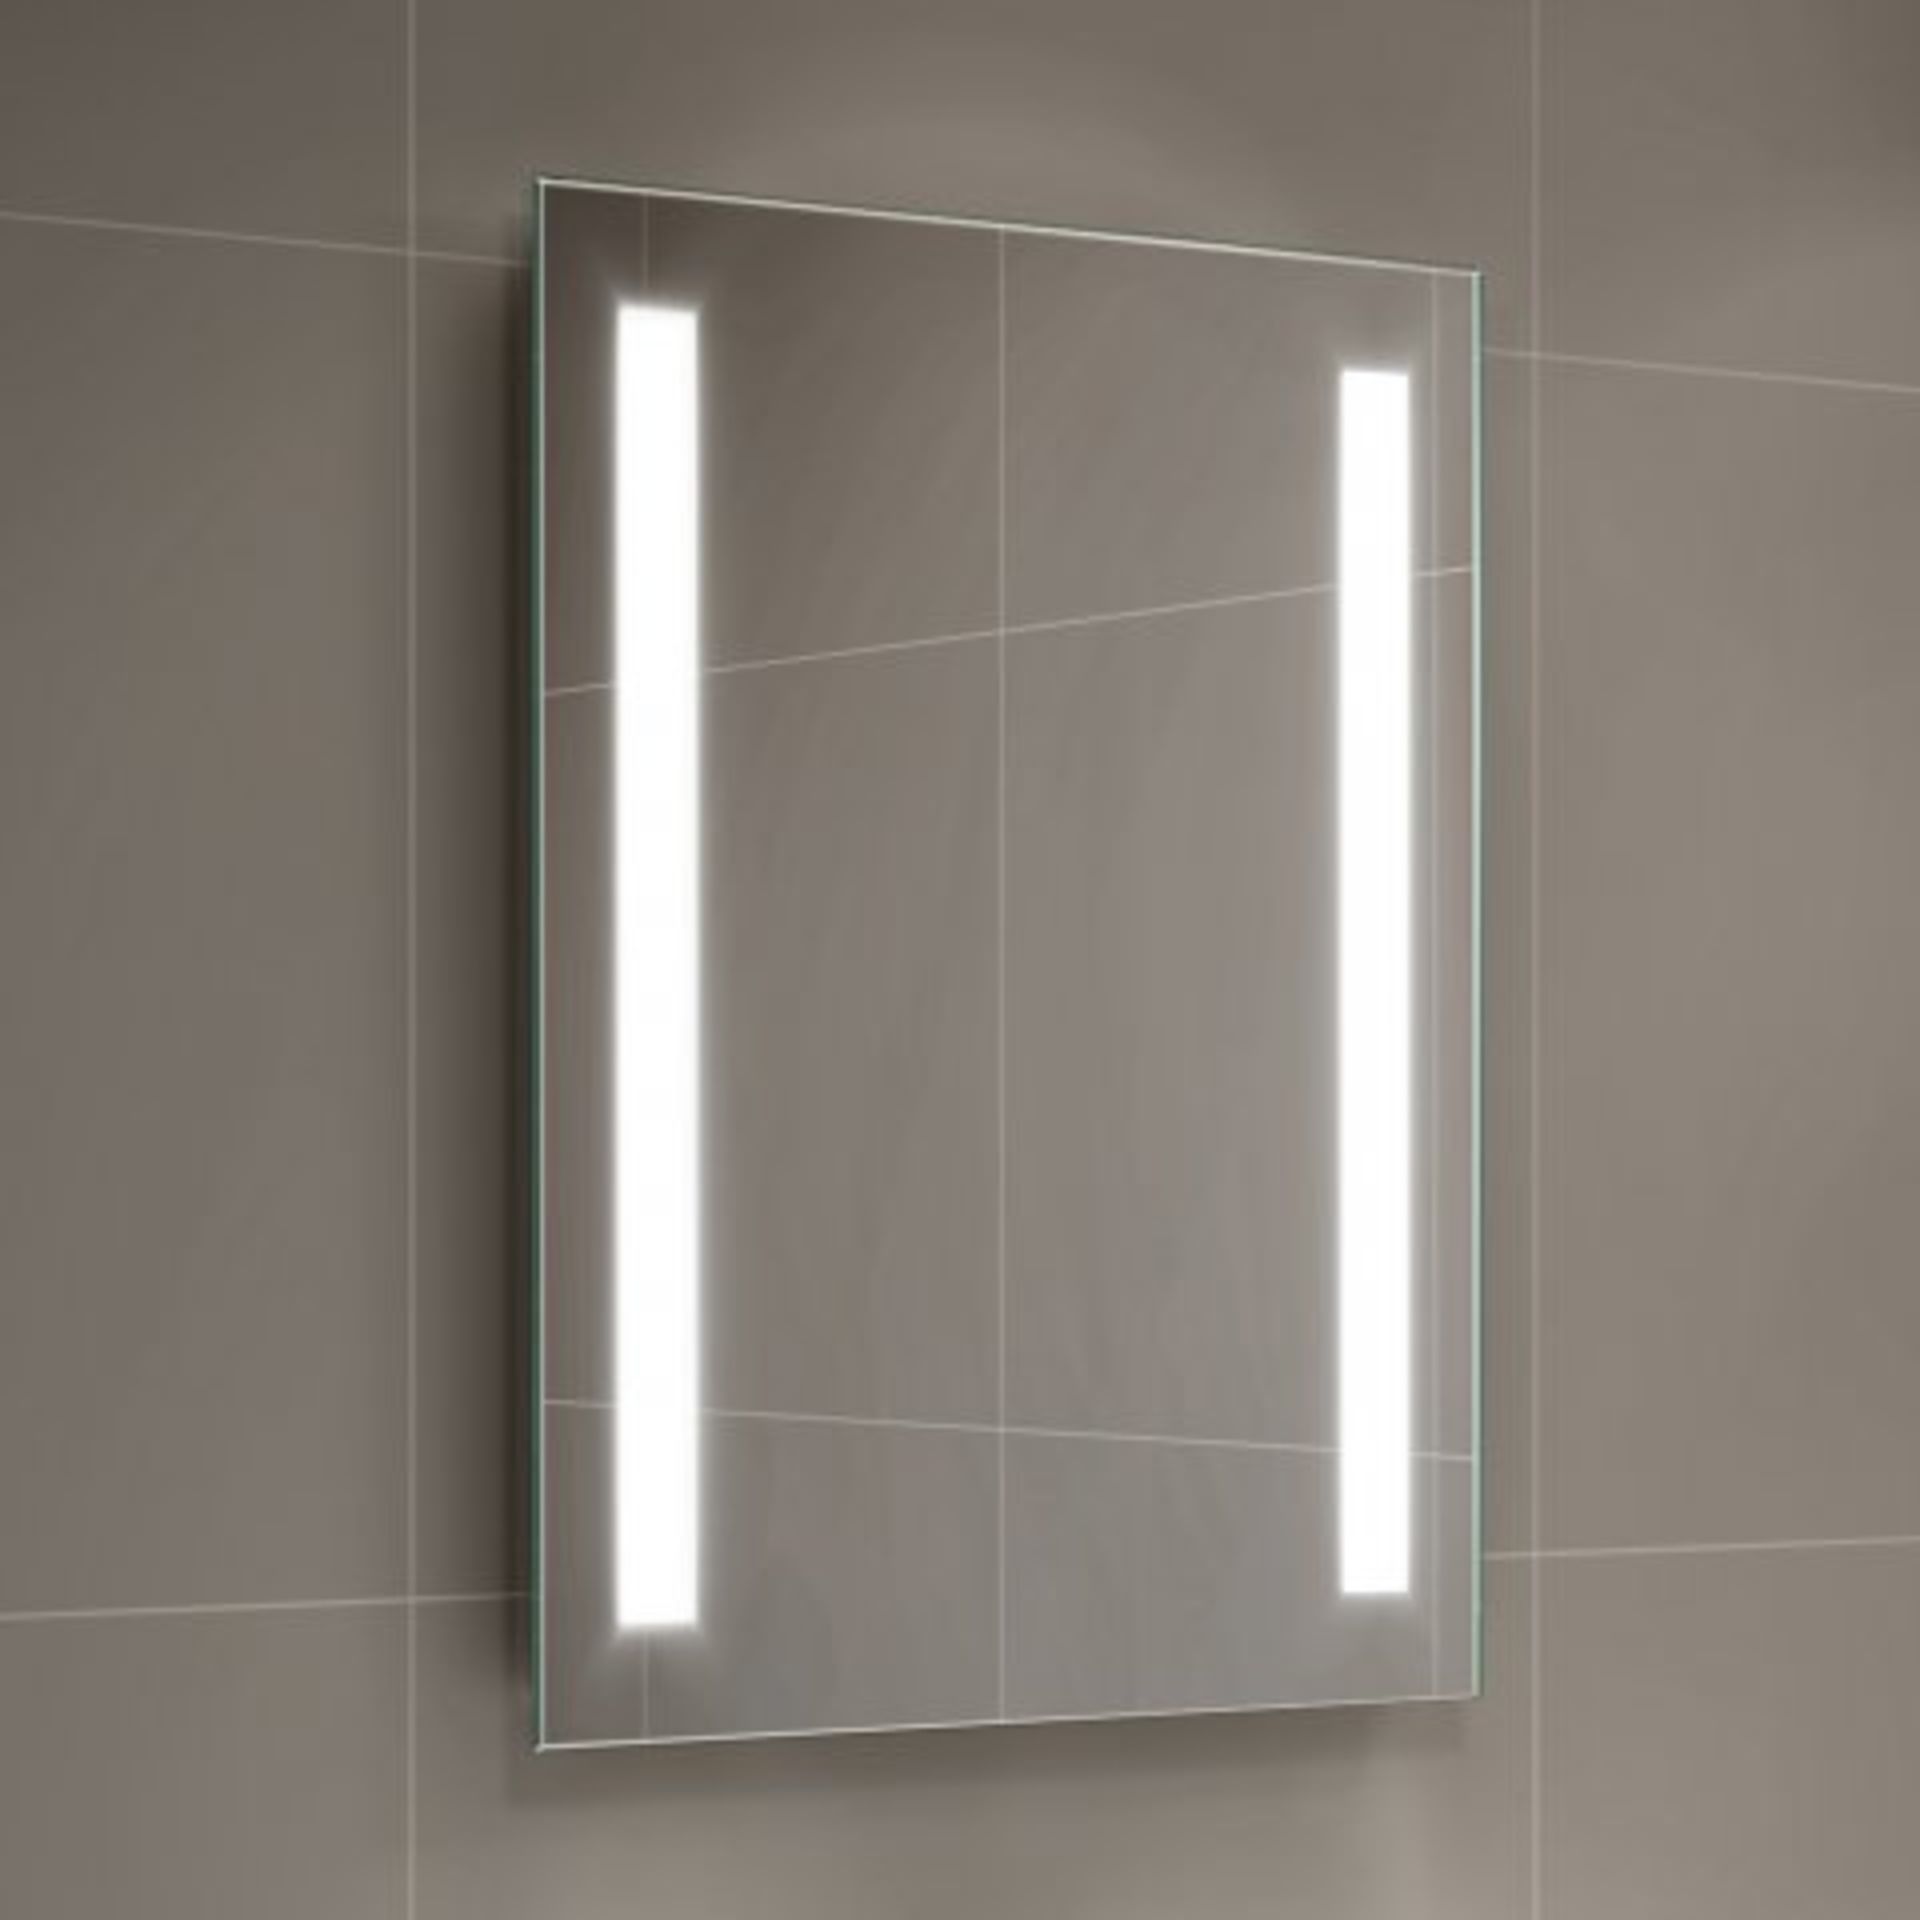 (H215) 500x700mm Omega LED Mirror - Battery Operated. RRP £249.99. Our ultra-flattering LED